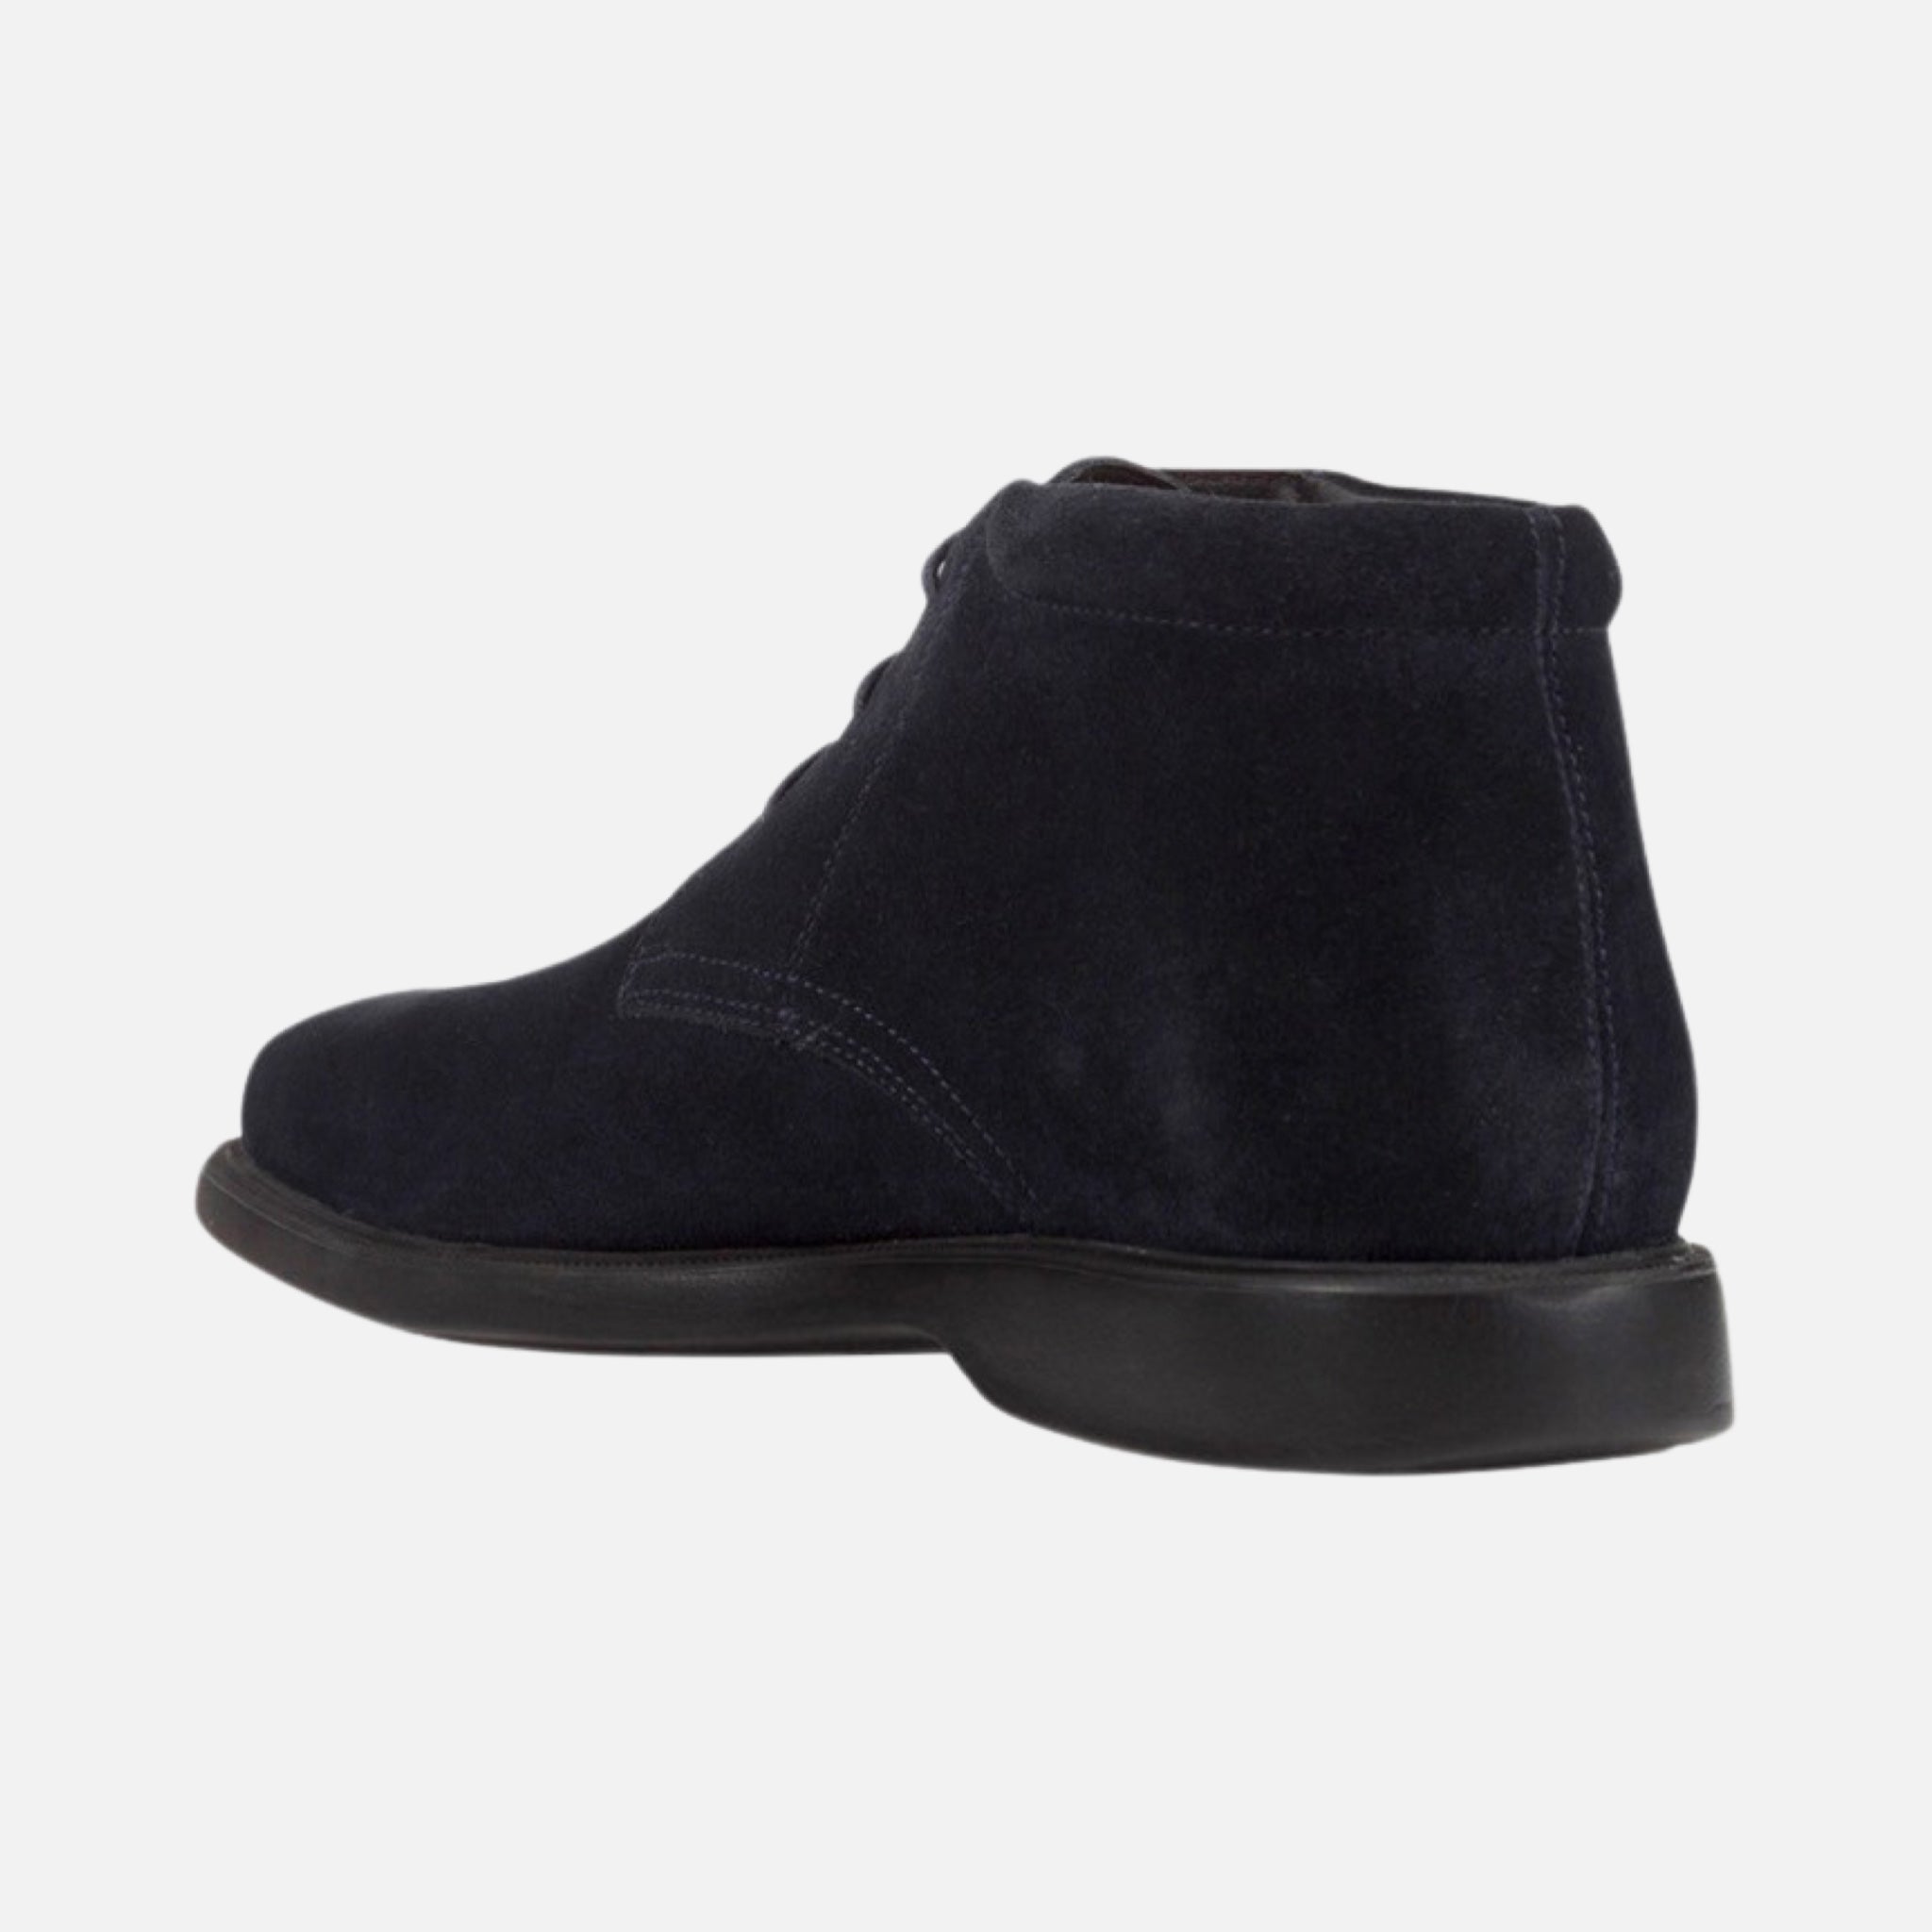 Navy blue suede Geox lace up boots